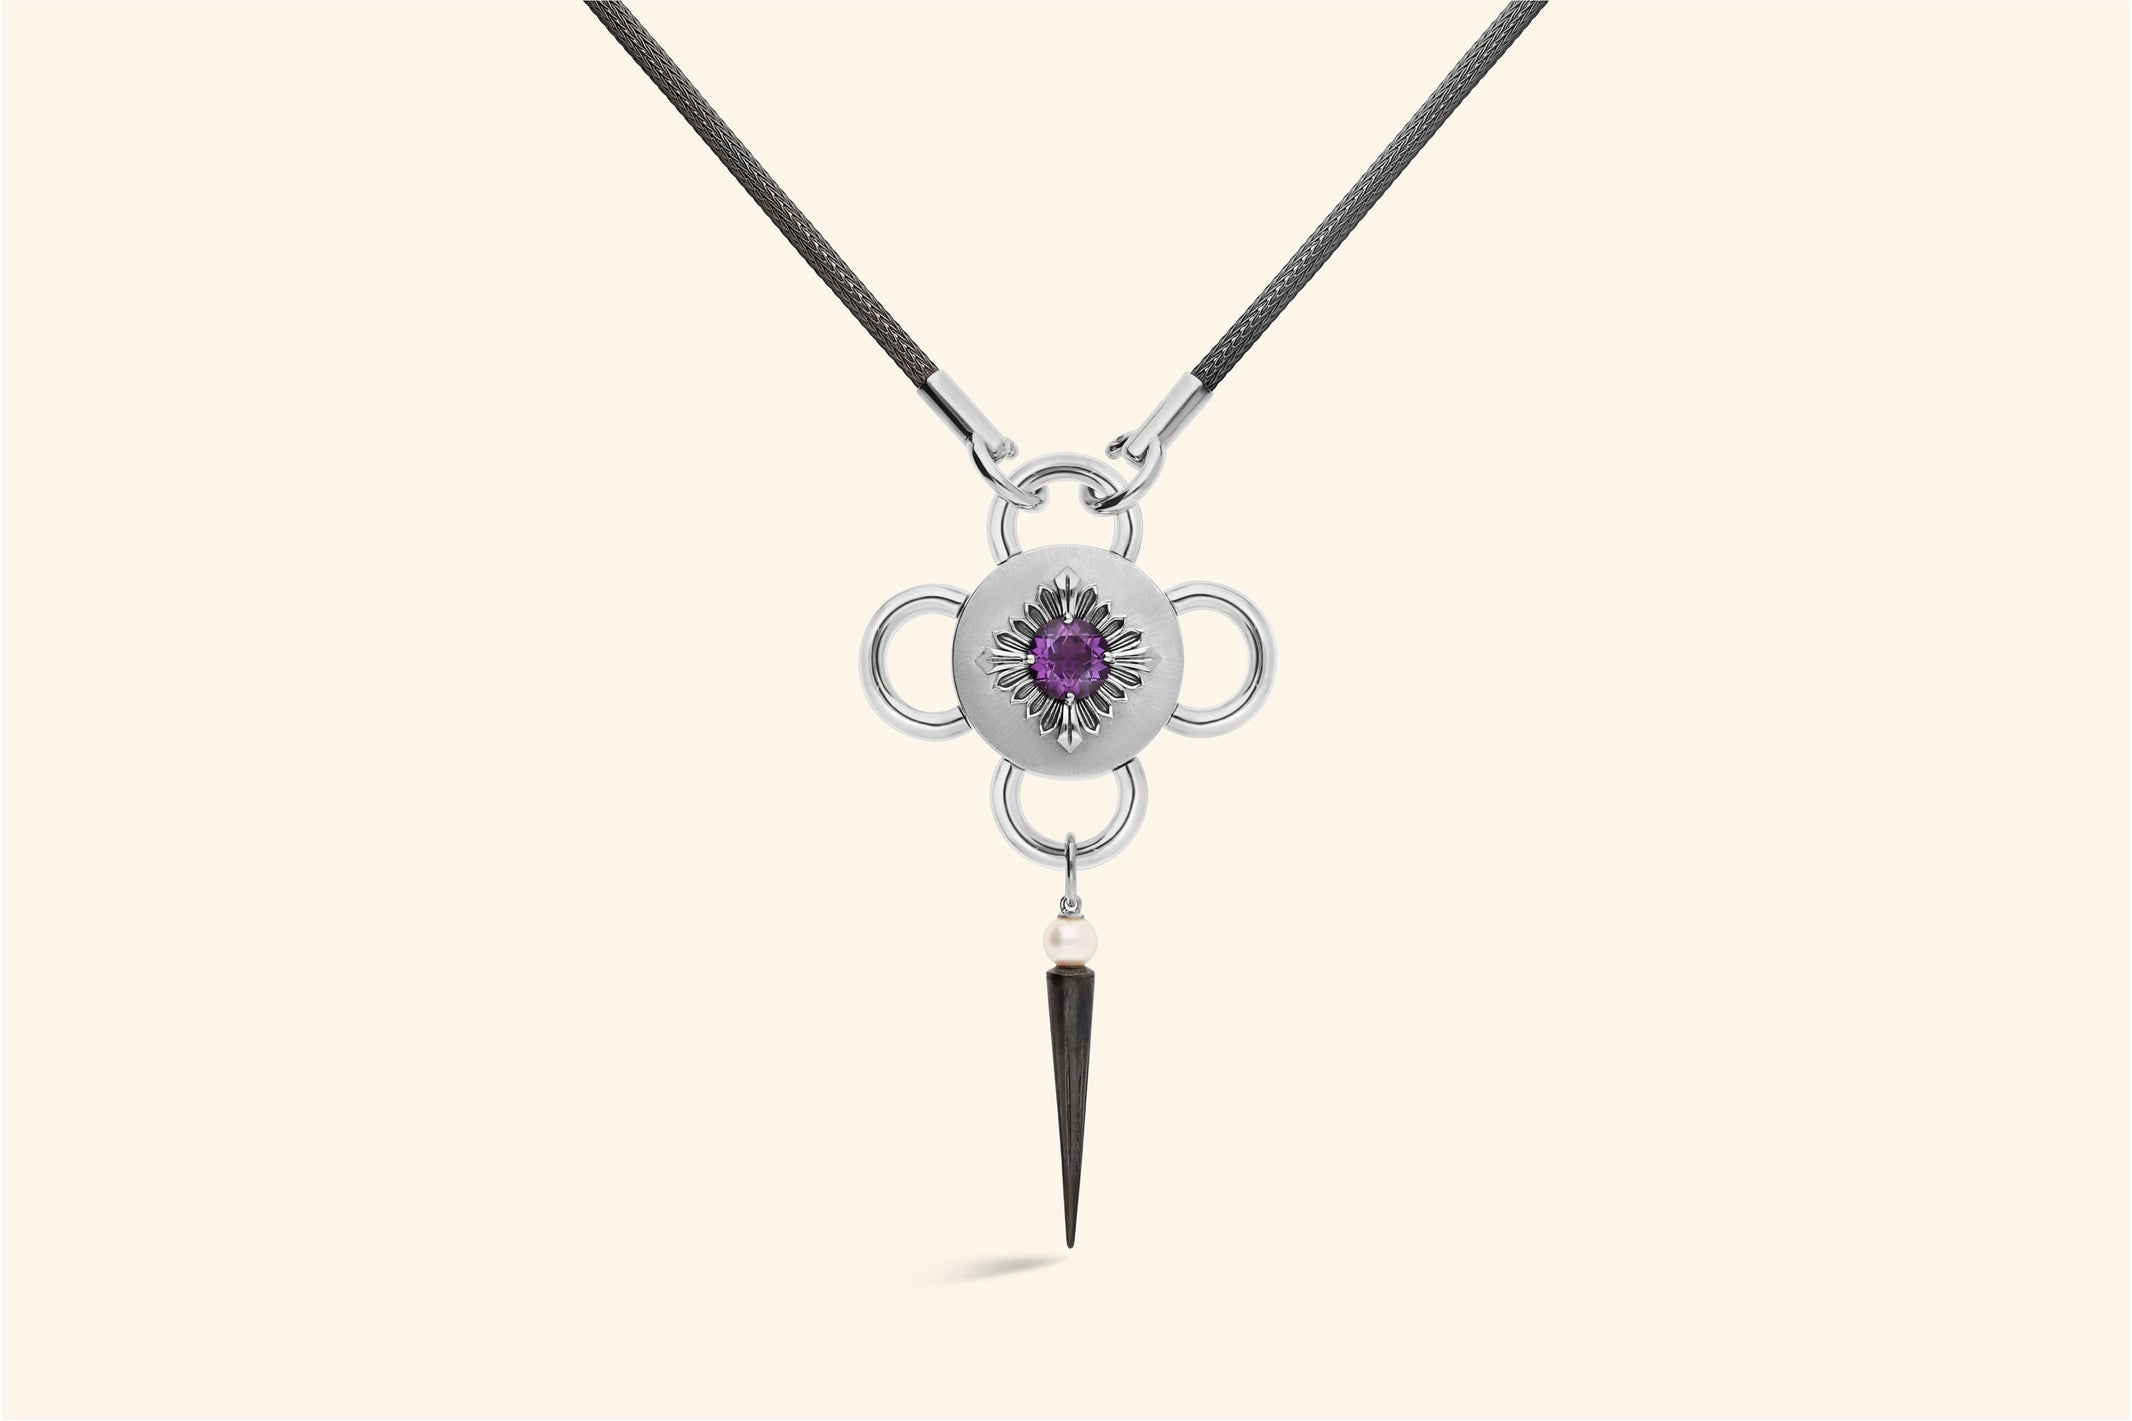 Bolt necklaceThis ~2.50 carat amethyst is set with a polished blackened silver flower, itself set on a satin-finish silver disk . Akoya bead. Knitted chain in blackened silver. 